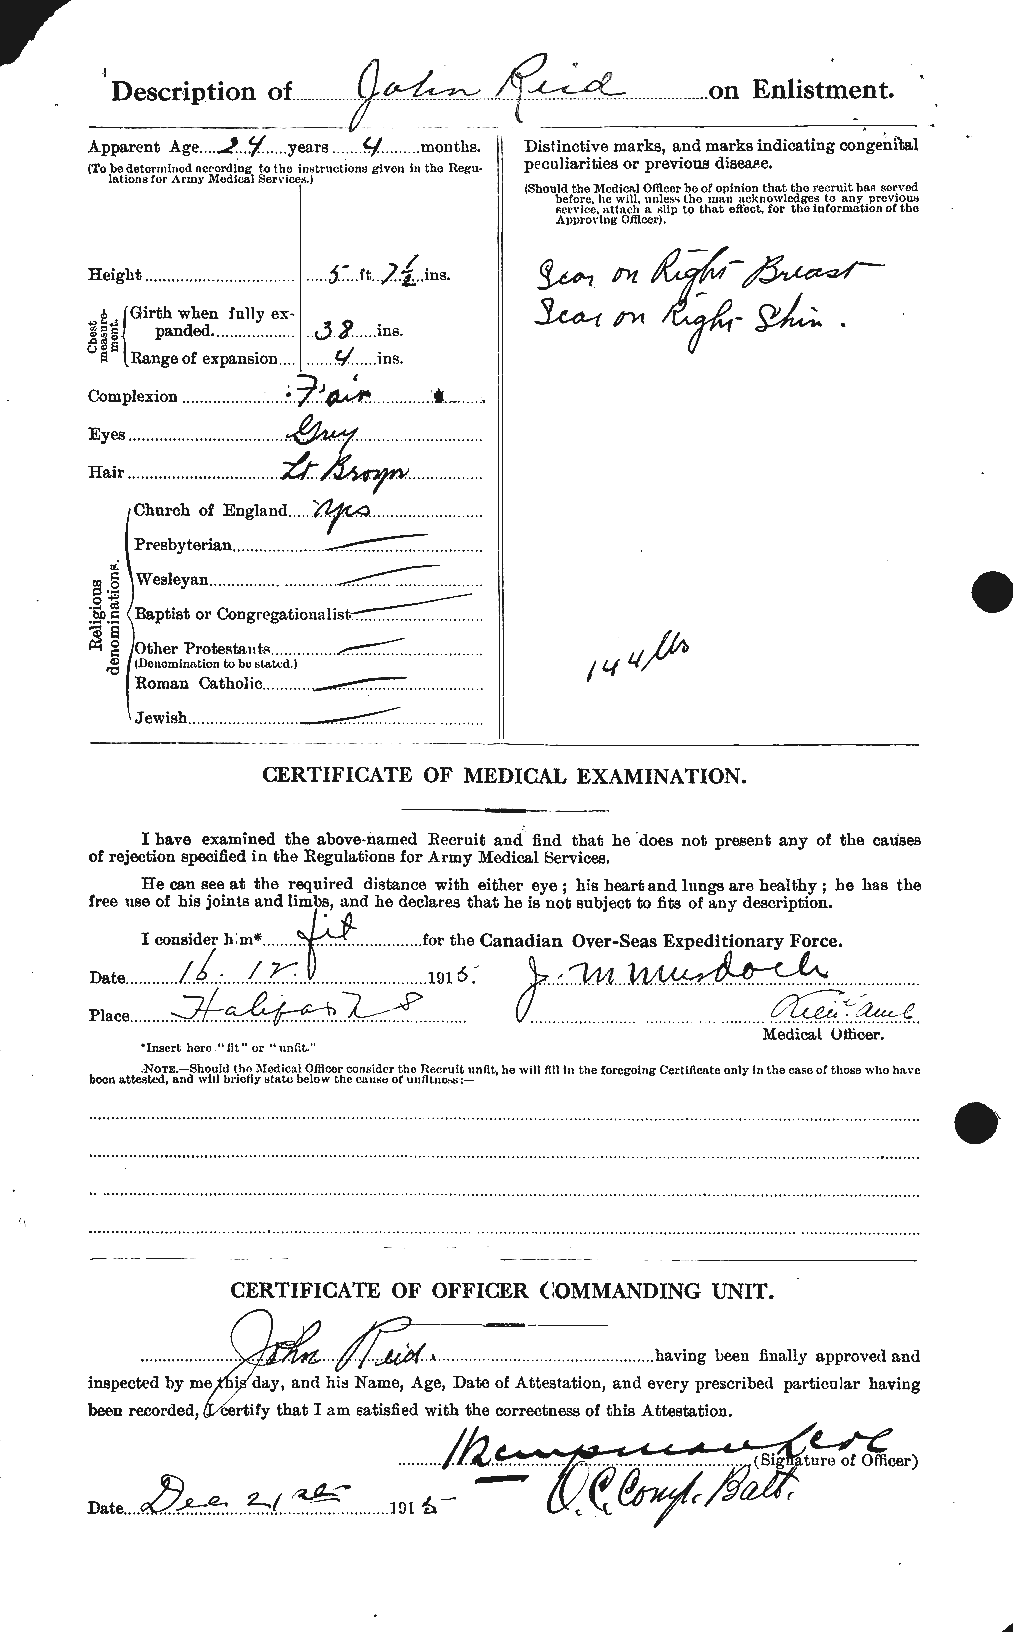 Personnel Records of the First World War - CEF 598756b